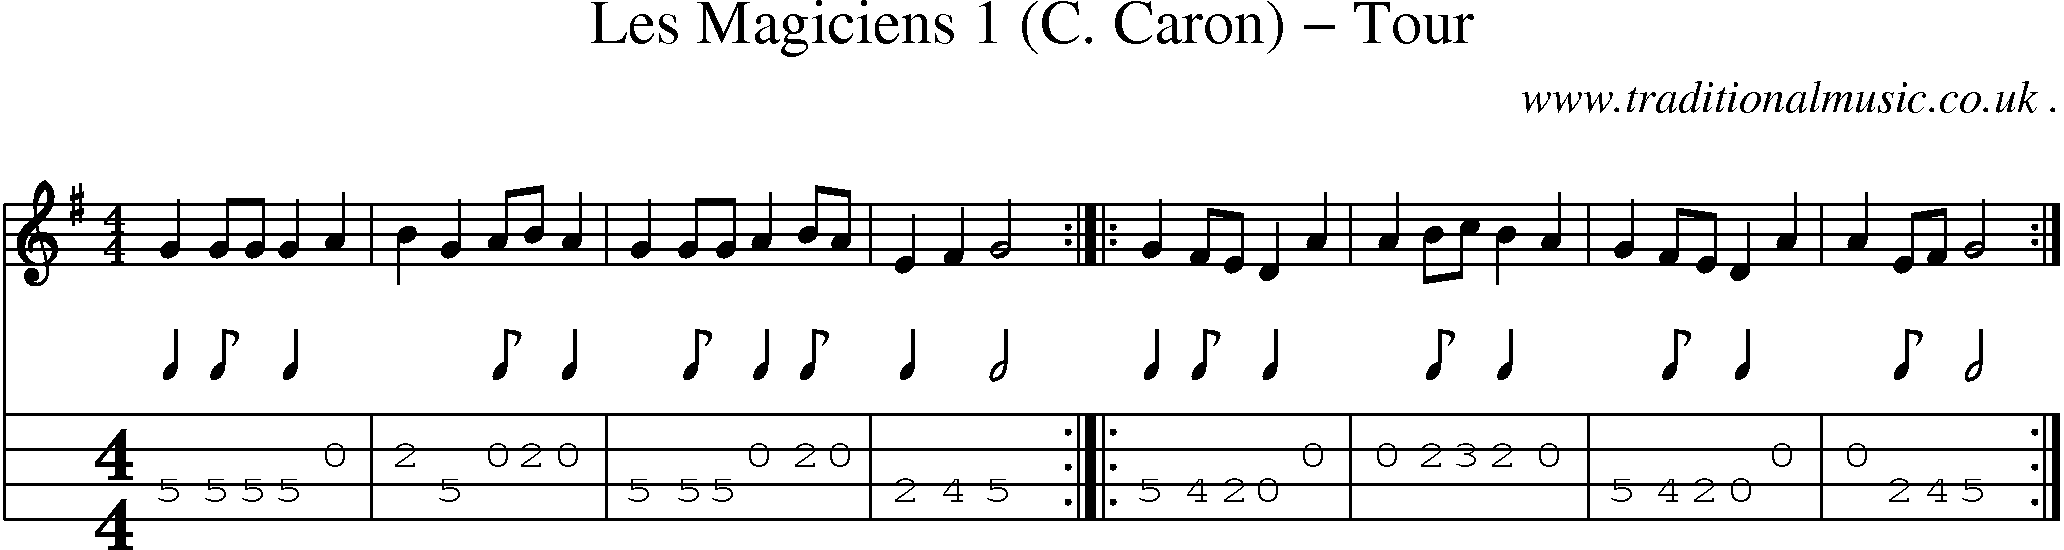 Sheet-Music and Mandolin Tabs for Les Magiciens 1 (c Caron) Tour